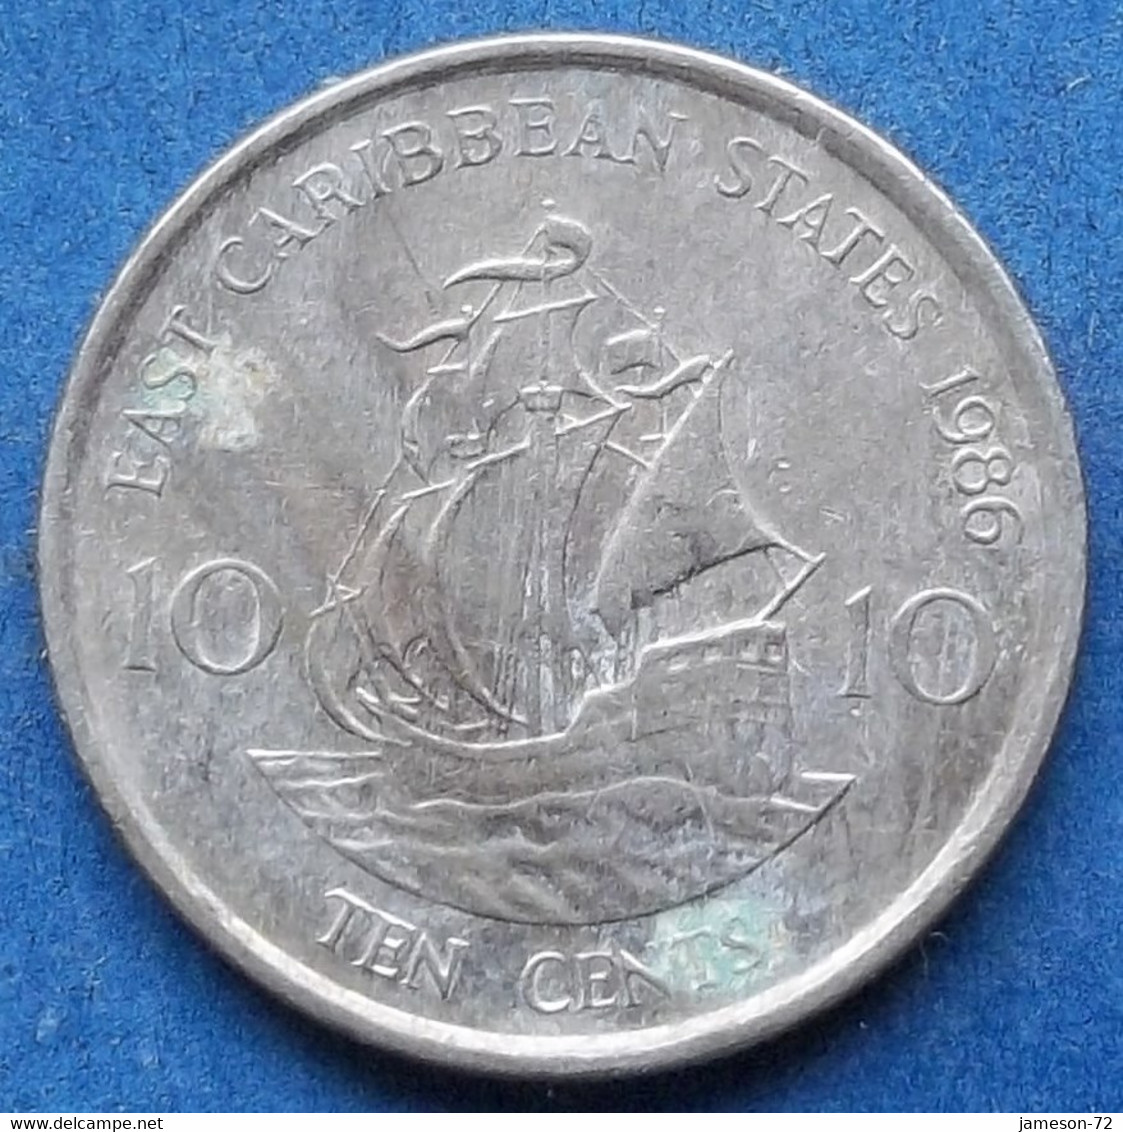 EAST CARIBBEAN STATES - 10 Cents 1986 KM# 13 - Edelweiss Coins - East Caribbean States